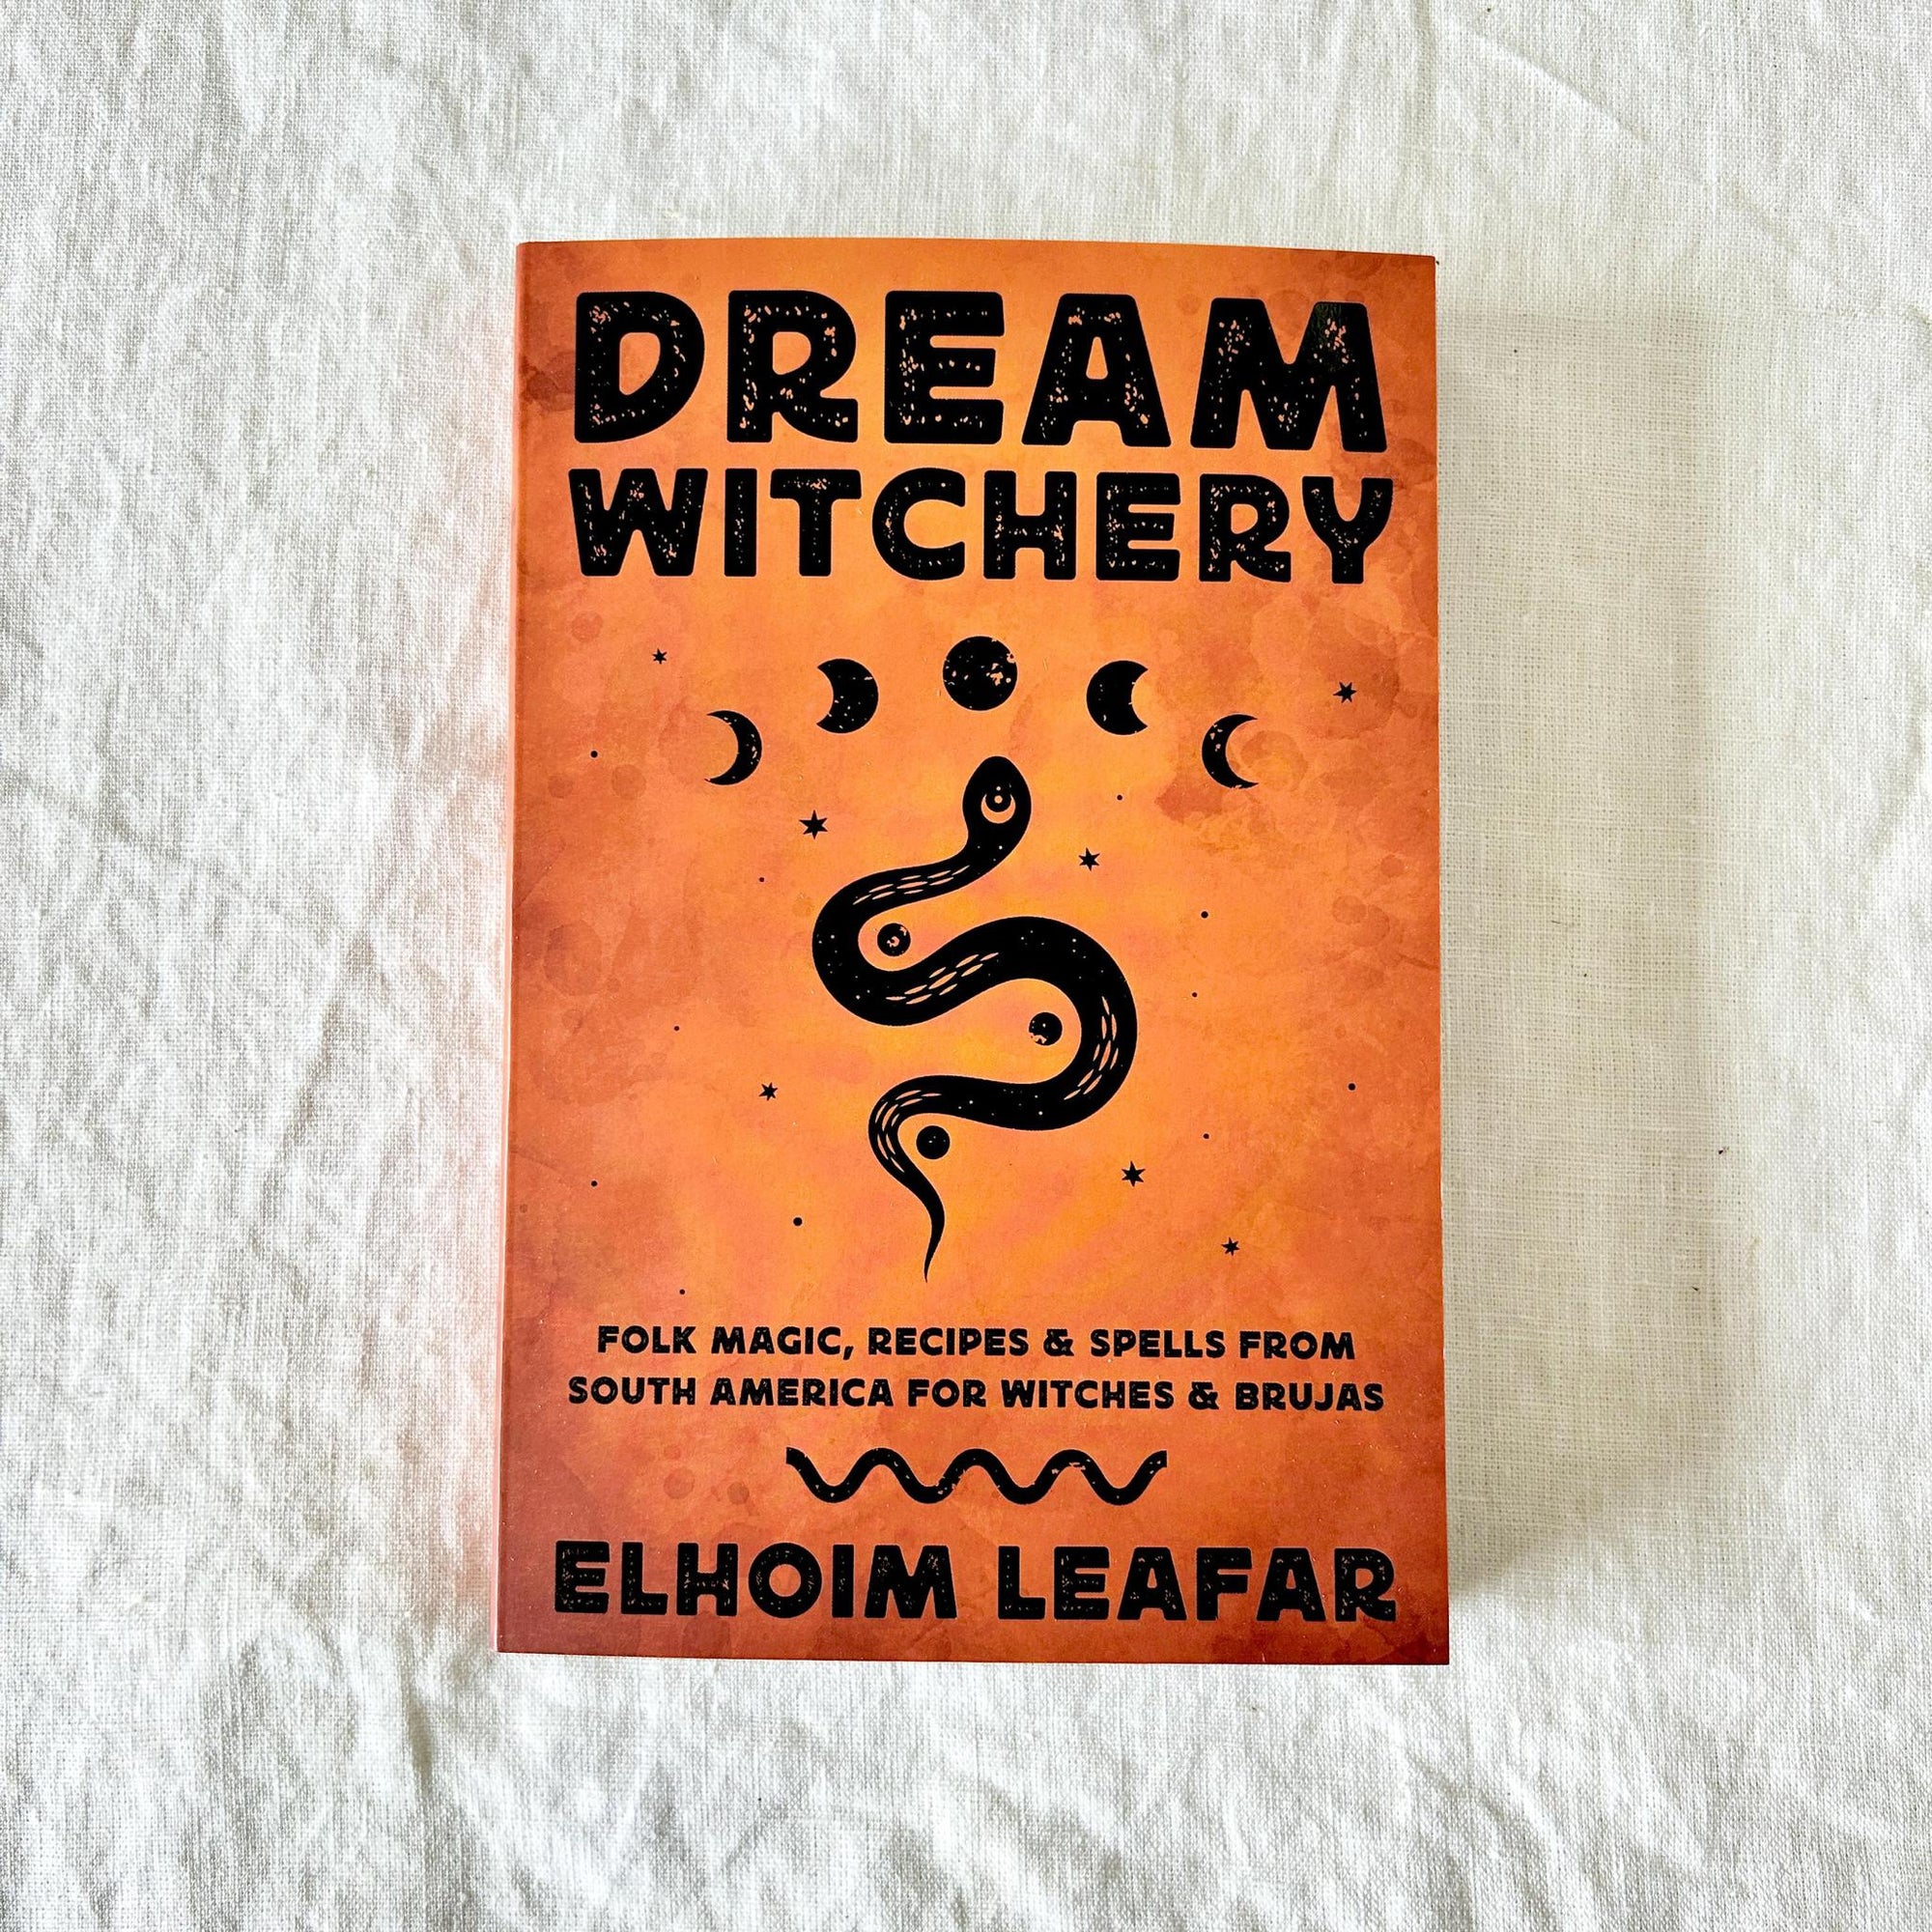 Dream Witchery by Elhoim Leafar. Experience the Magic of the Dream World Through South American Witchcraft  Venezuelan practitioner Elhoim Leafar presents more than seventy spells, charms, folk remedies, and exercises to help you understand the world of dreams. With his wealth of experience, Elhoim demonstrates what dream witchery is, why it's important, and how to practice it.